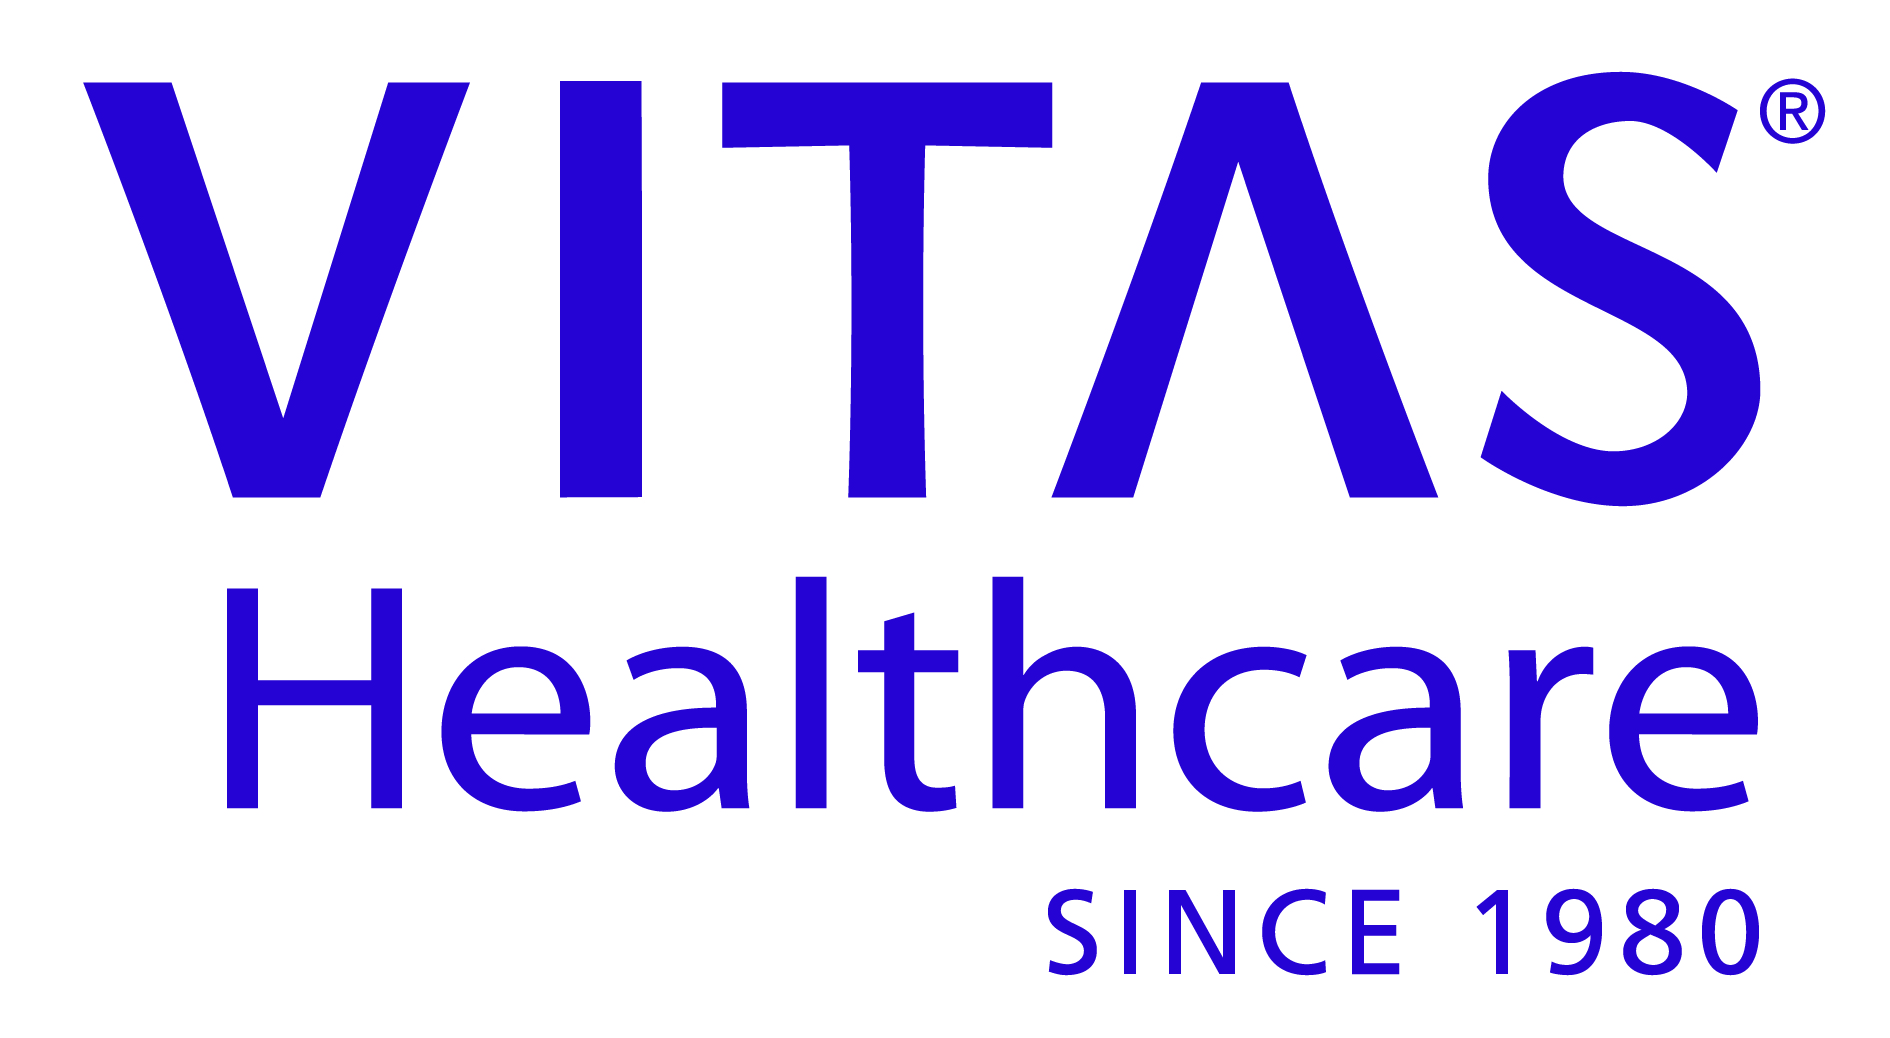 Ask the Doctor Lunch and Learn Series, presented by VITAS Healthcare